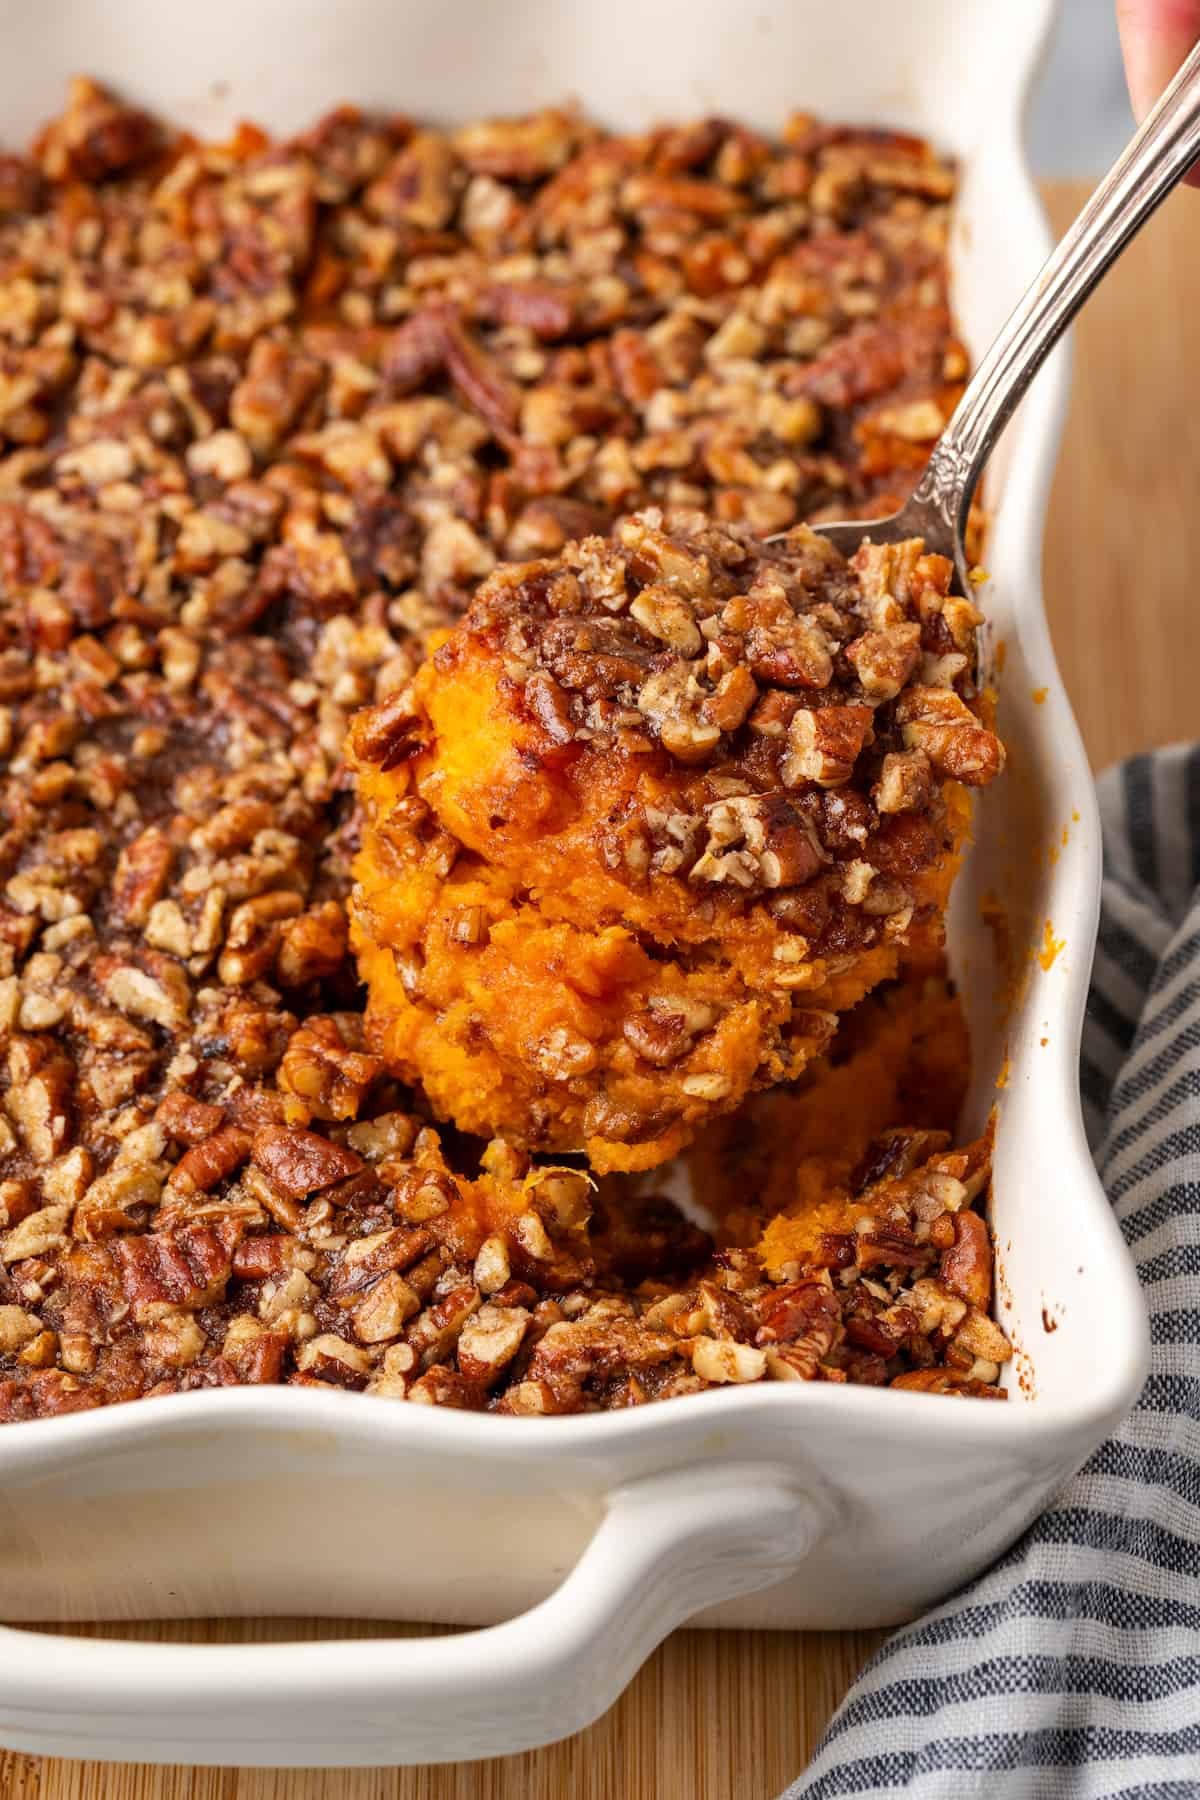 A spoon holding up a scoop of bourbon sweet potato casserole with a nutty streusel topping from a white casserole dish.